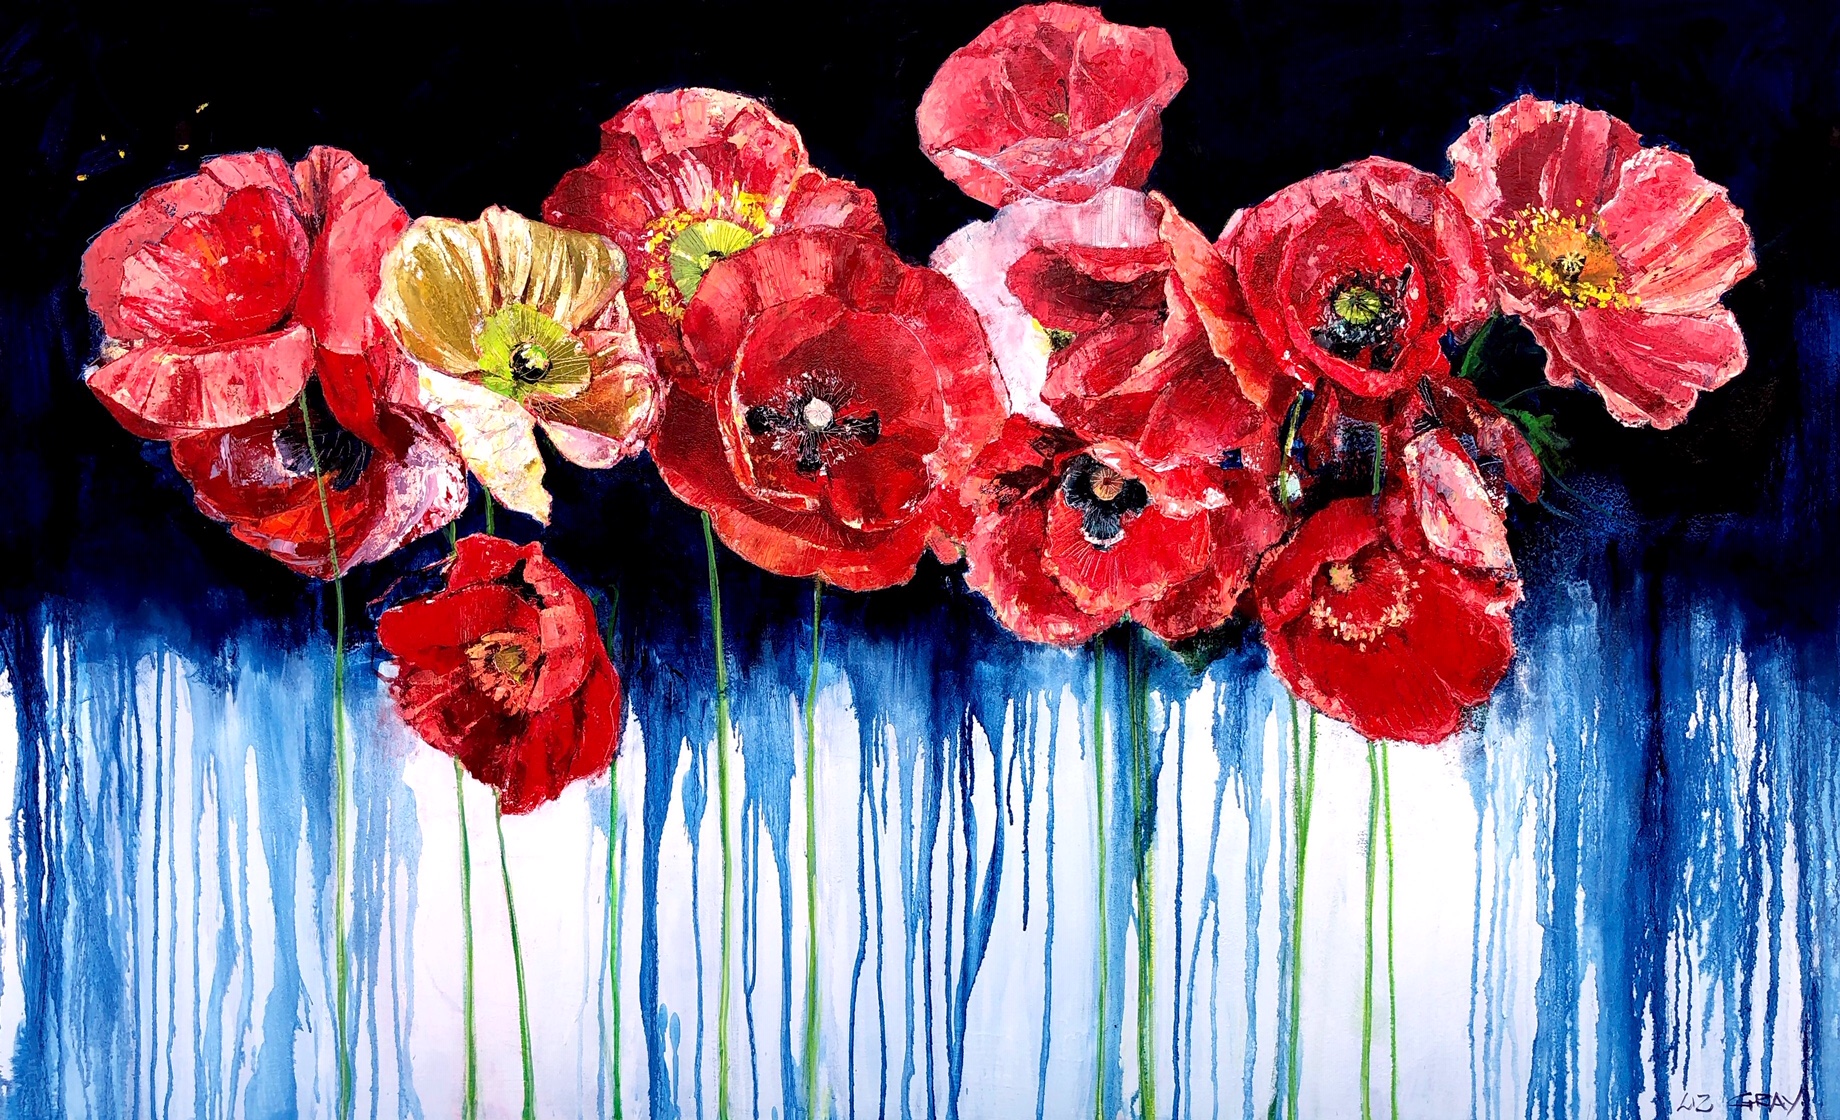 Liz Gray's Tall Poppies oil painting